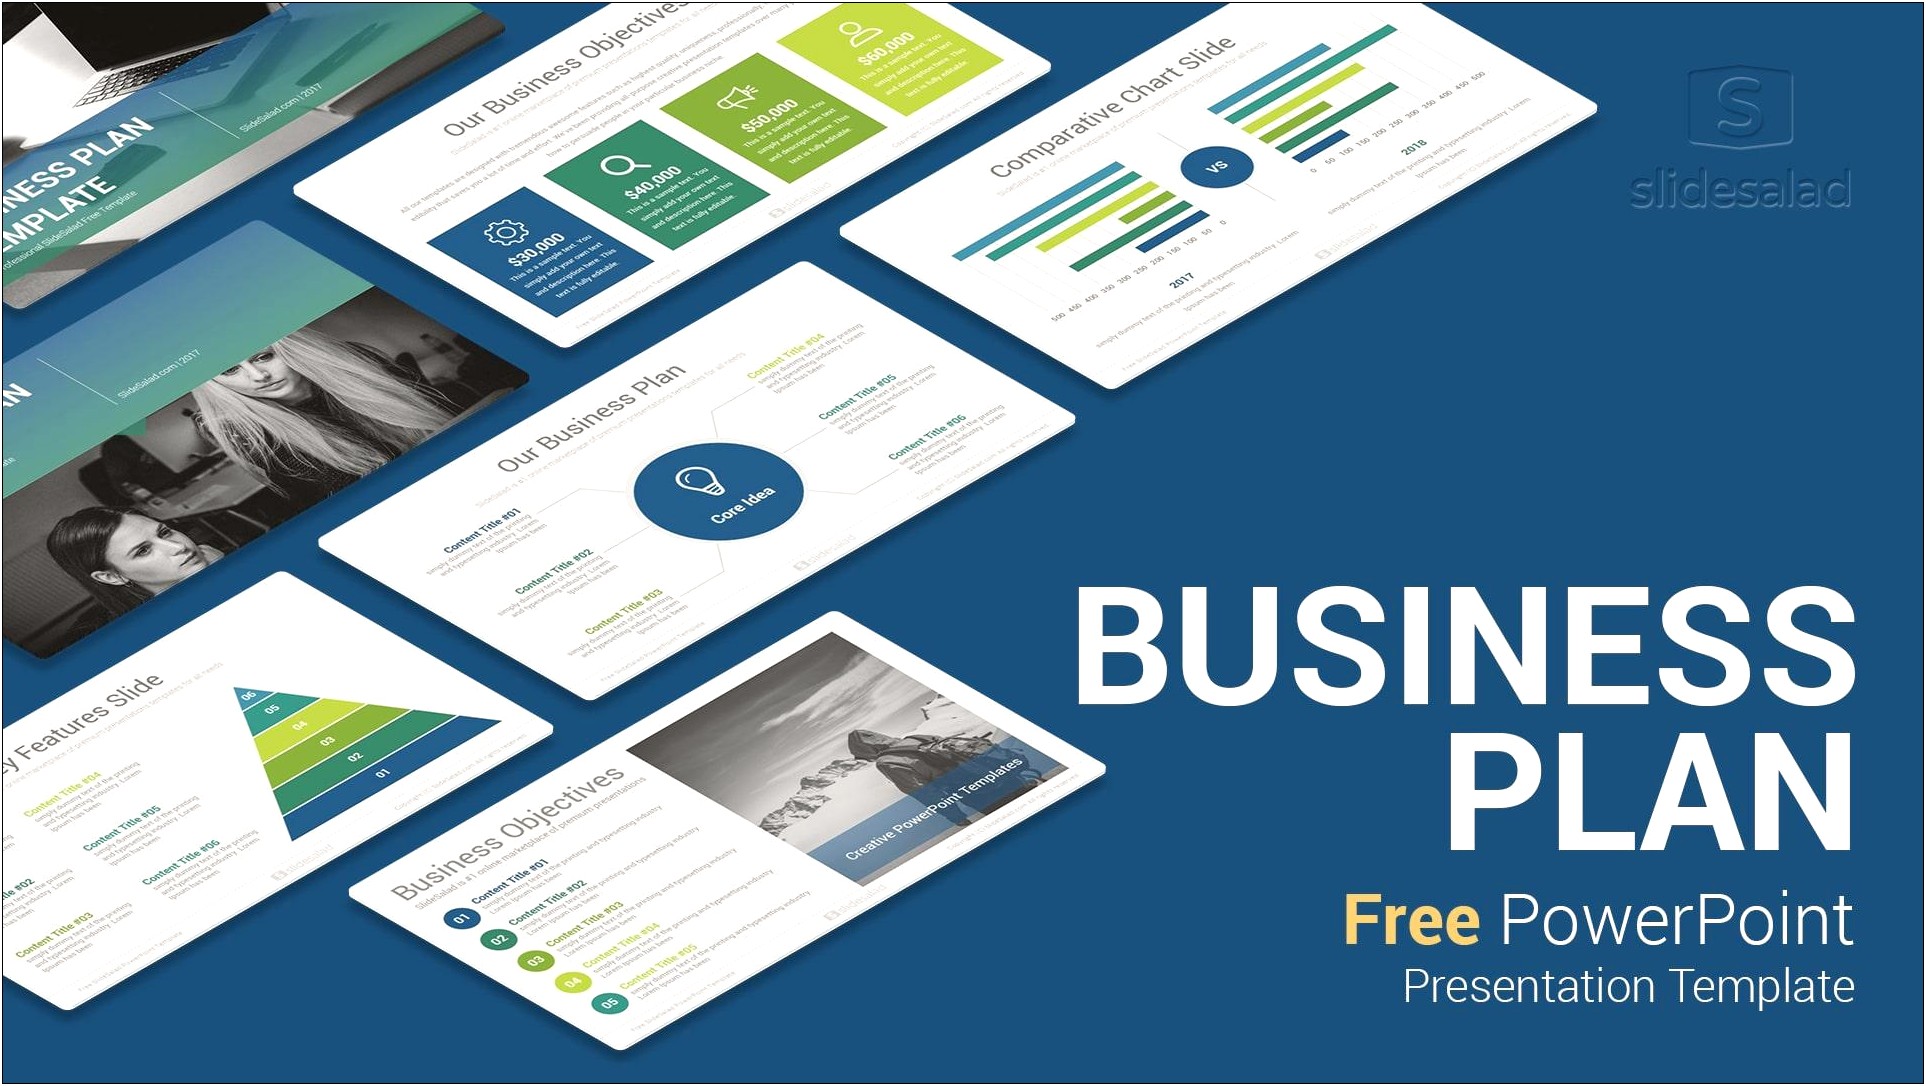 Company Profile Powerpoint Presentation Template Free Download